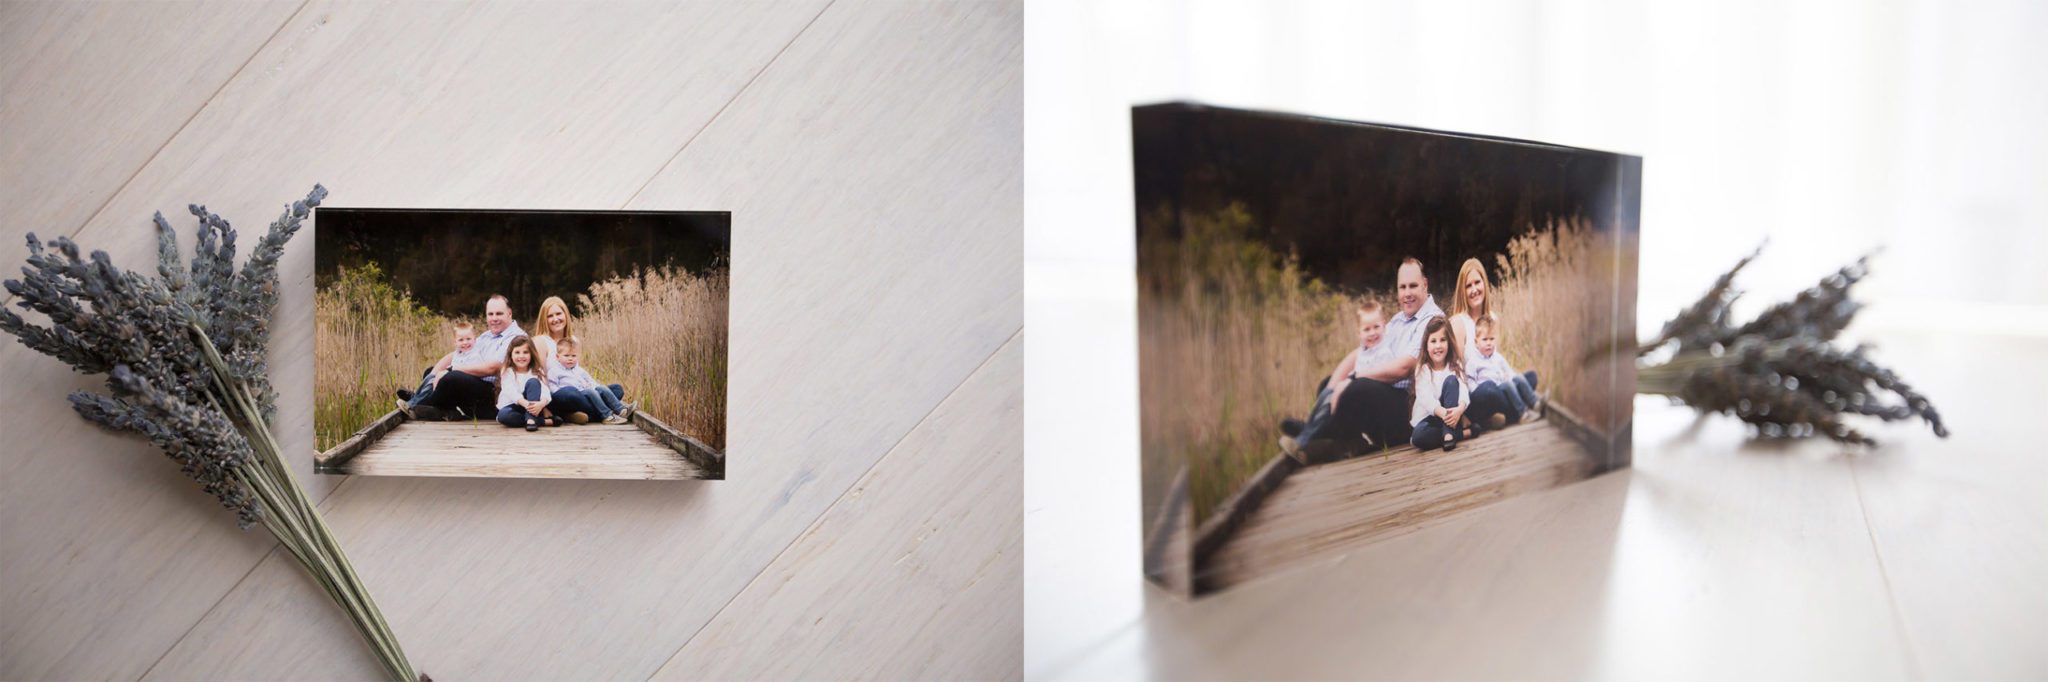 Acrylic tile examples showing images from a family session